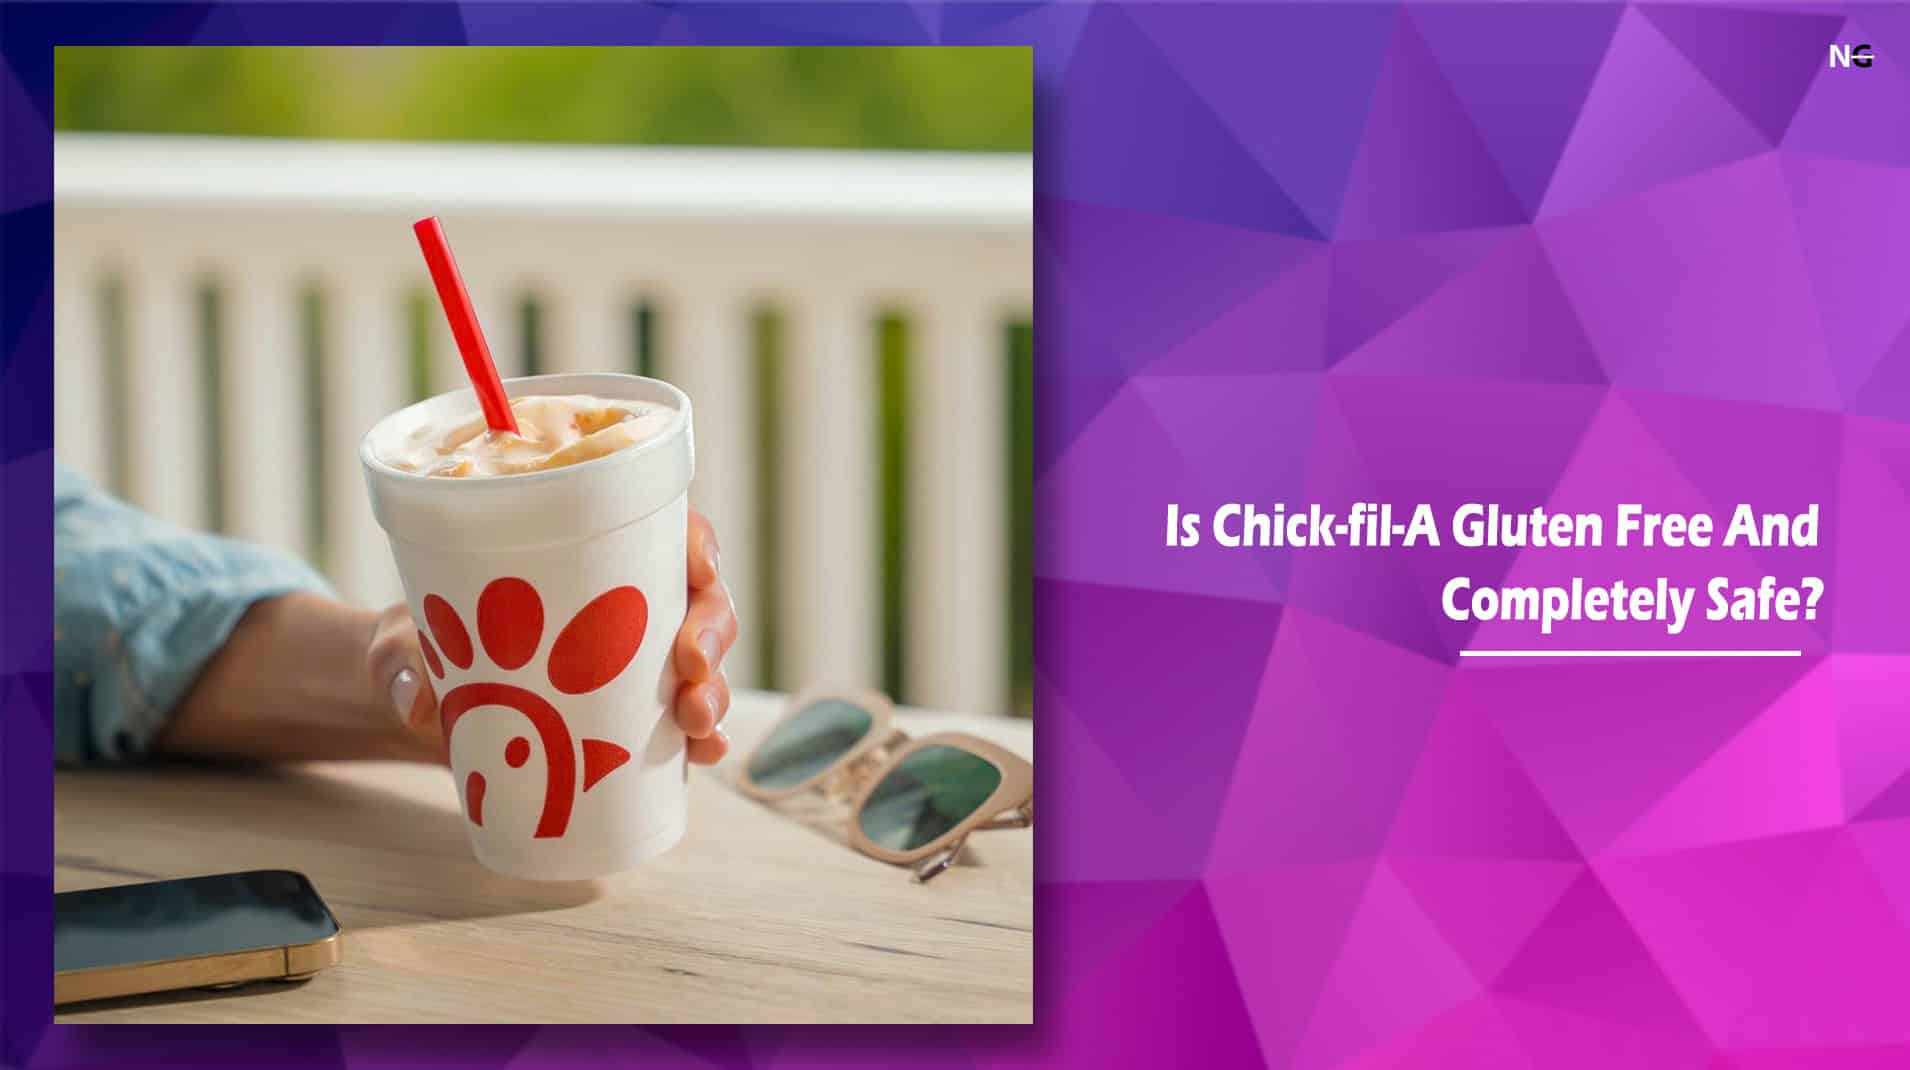 Is Chick-fil-A Gluten Free and Completely Safe